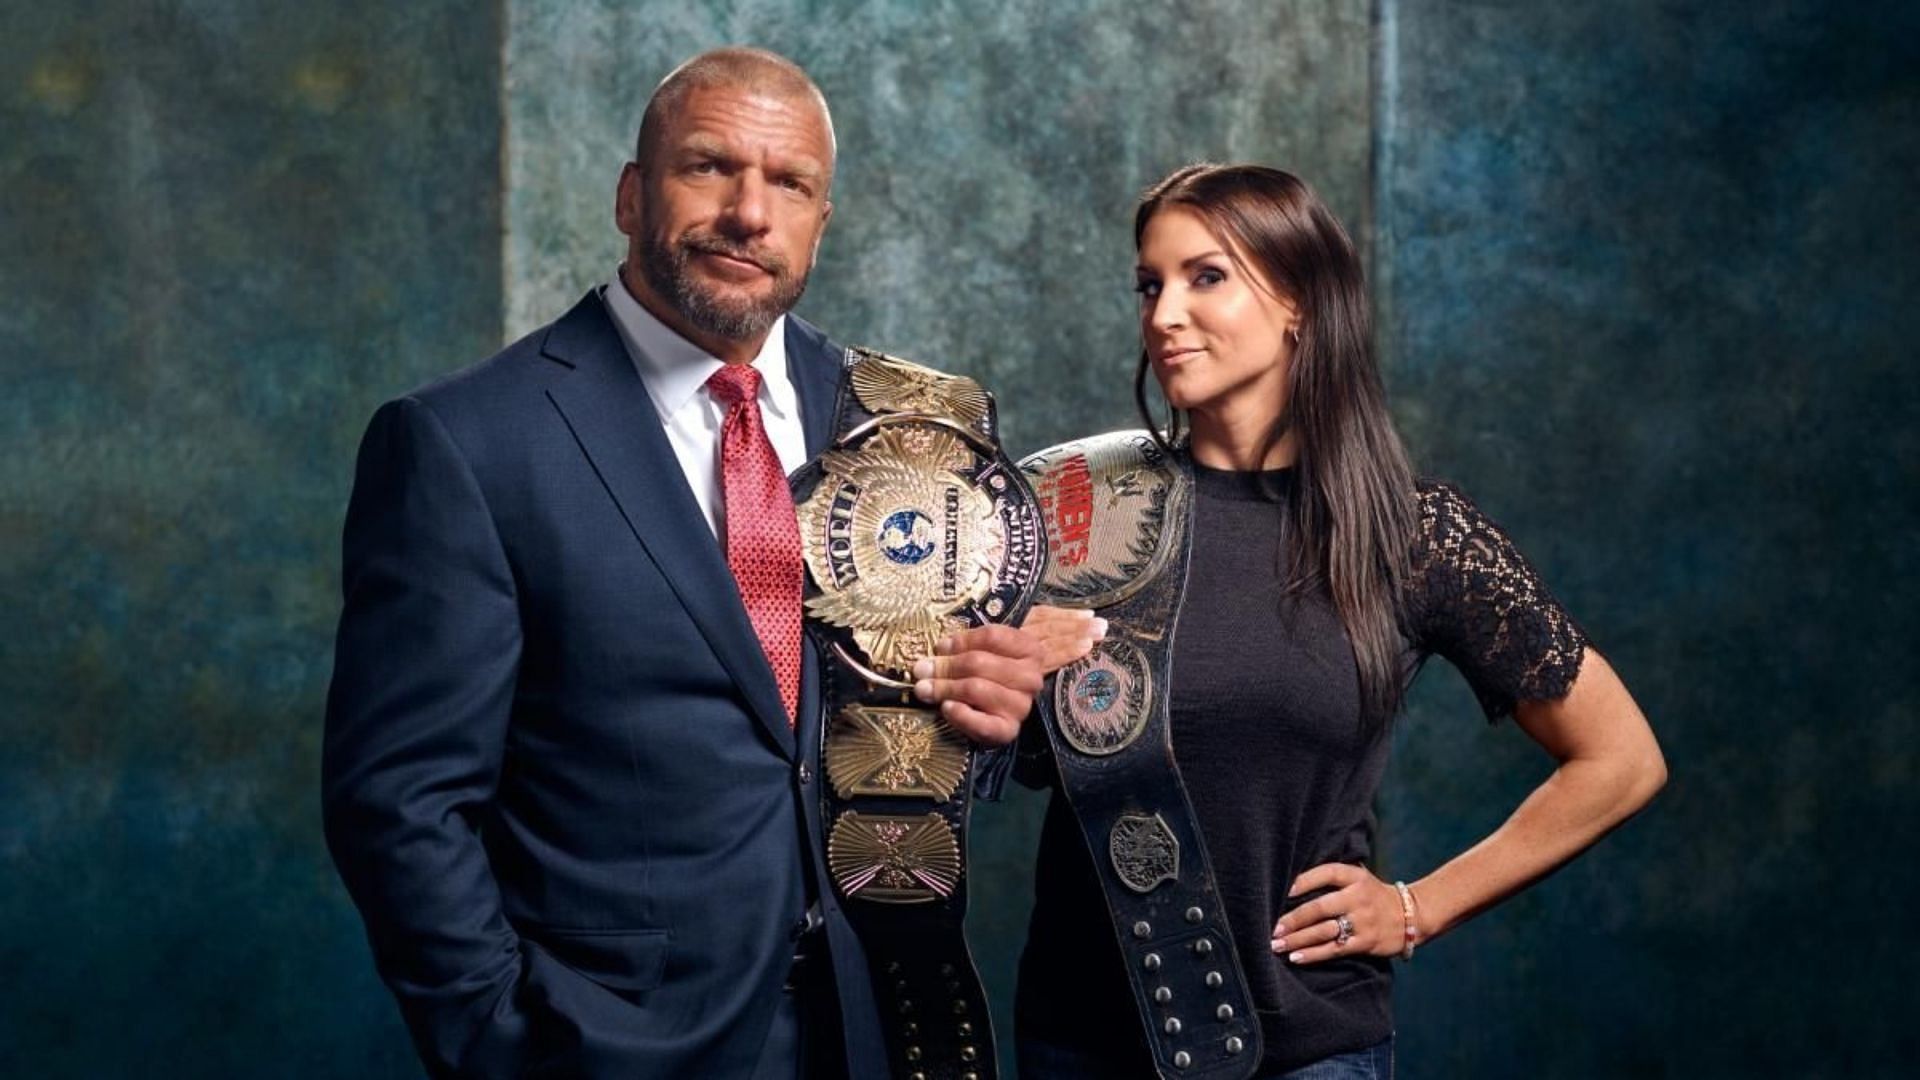 Triple H and Stephanie McMahon have new positions in WWE.